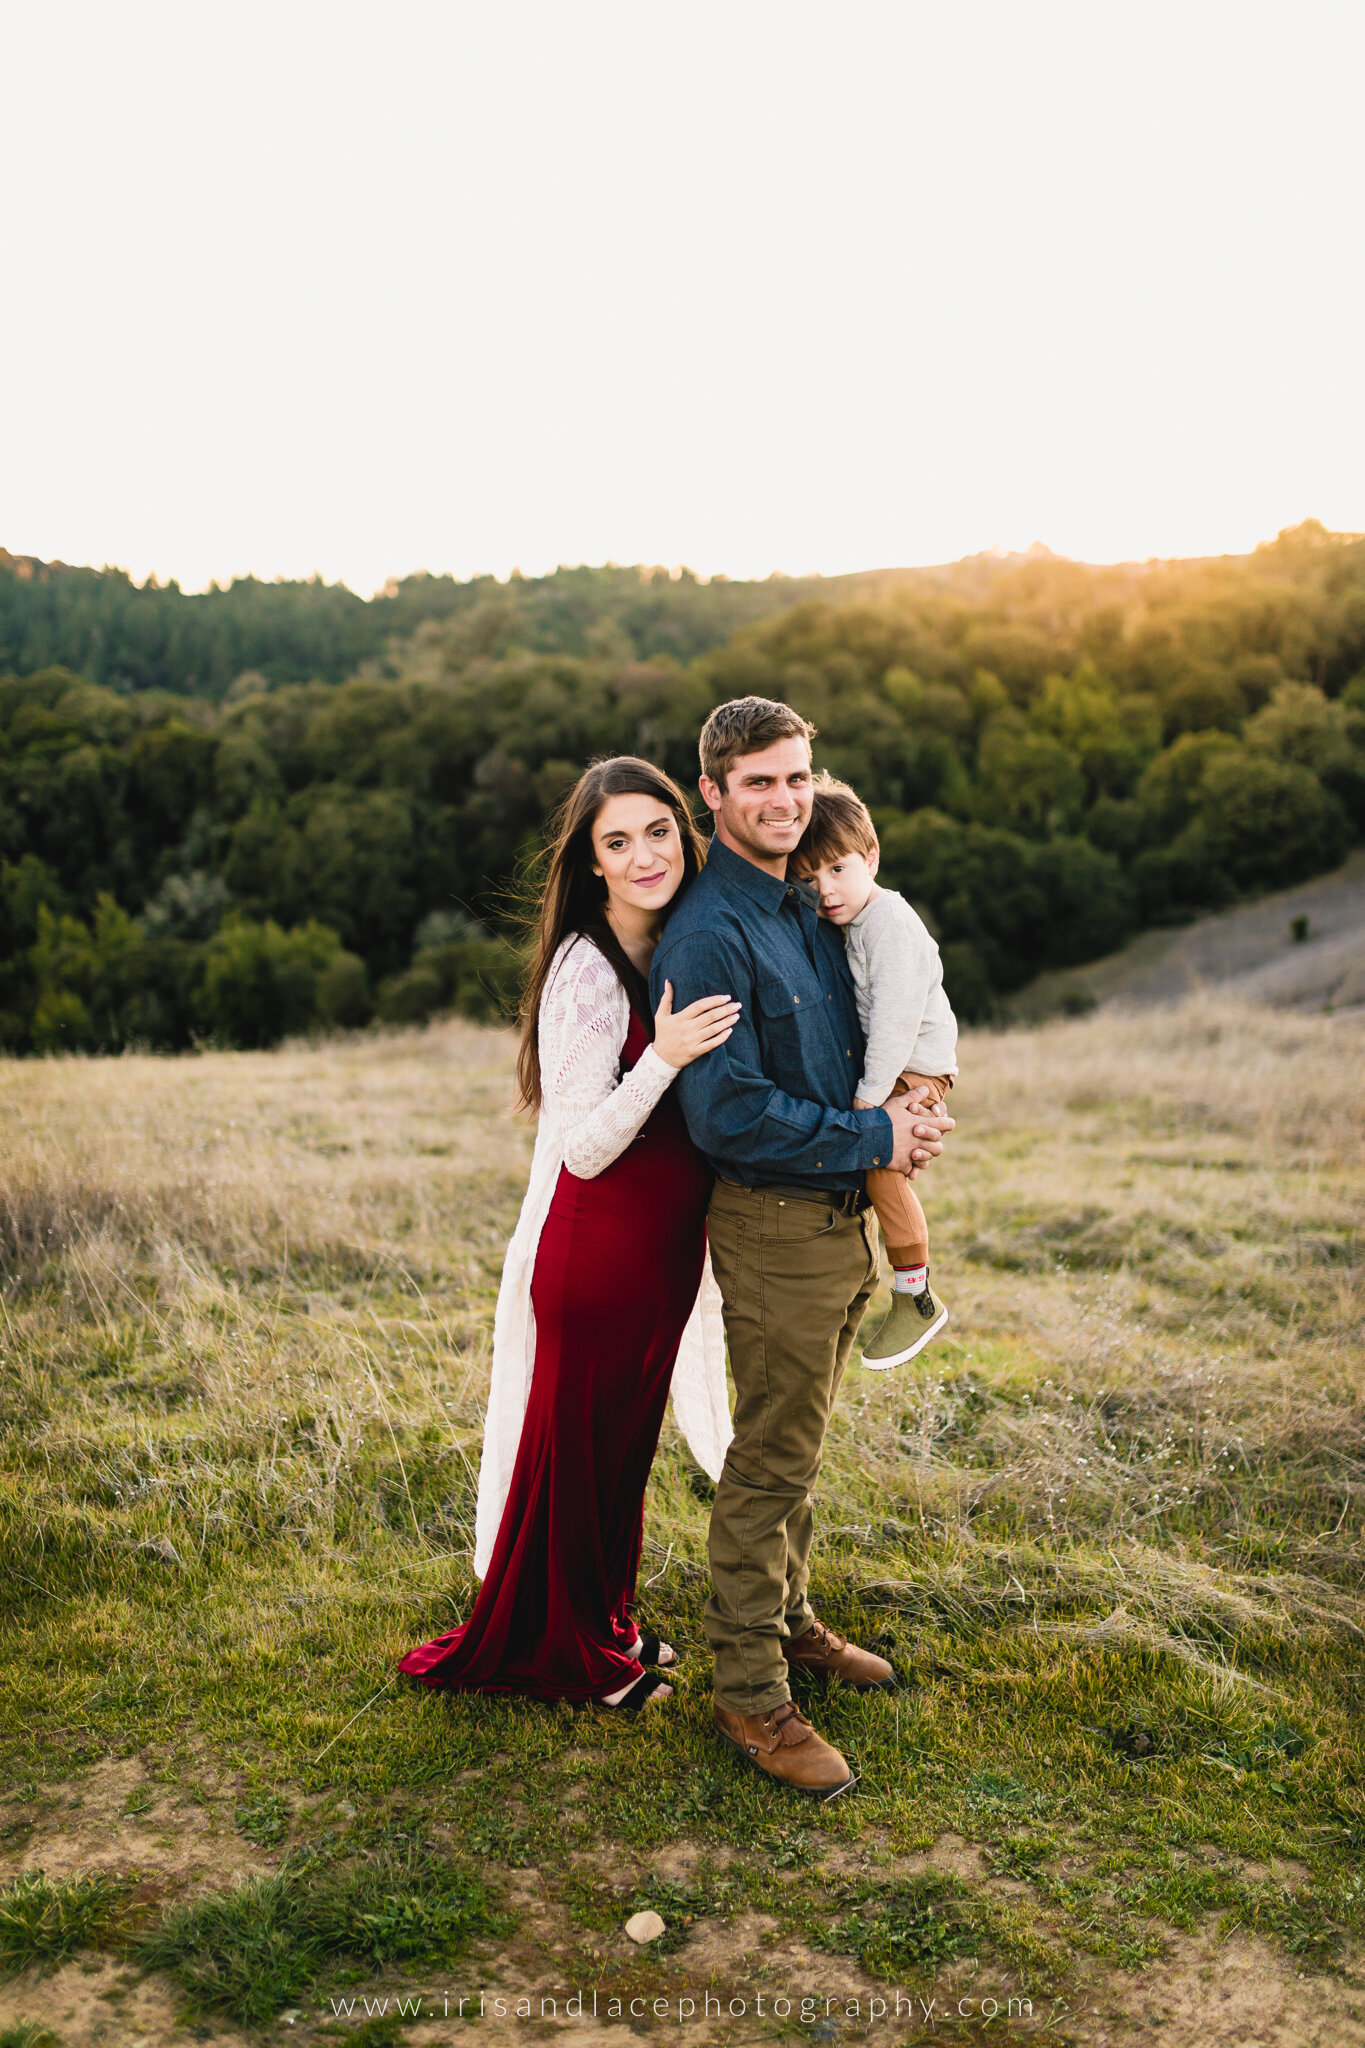 Mountain Sunset Family Photos in SF Bay Area  |   Iris and Lace Photography